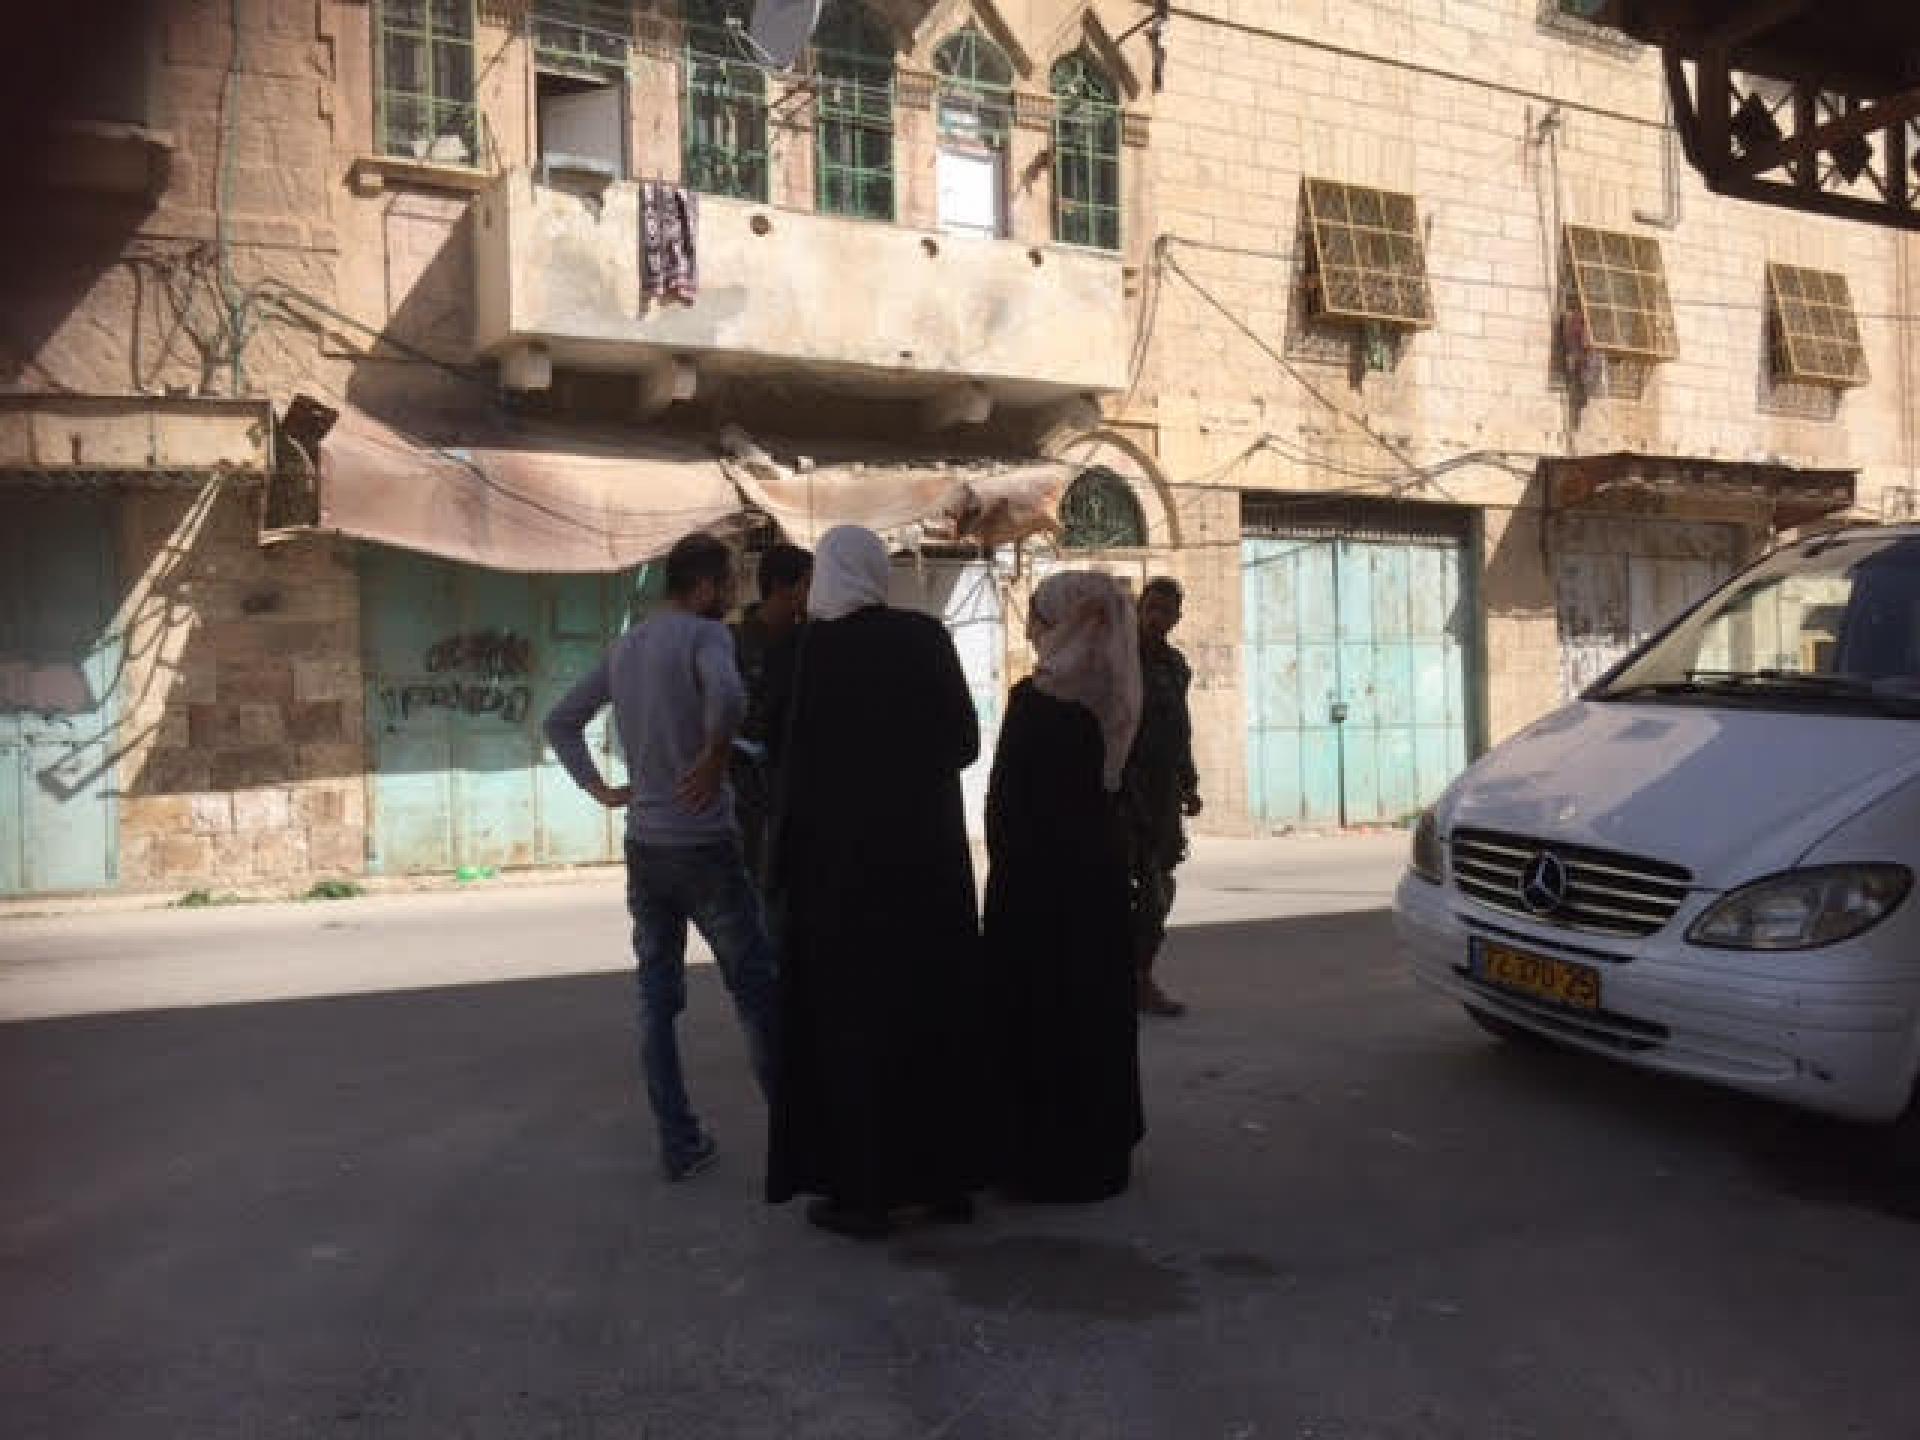 Three Palestinians got confused on their way to the Sharia court and were stopped by soldiers